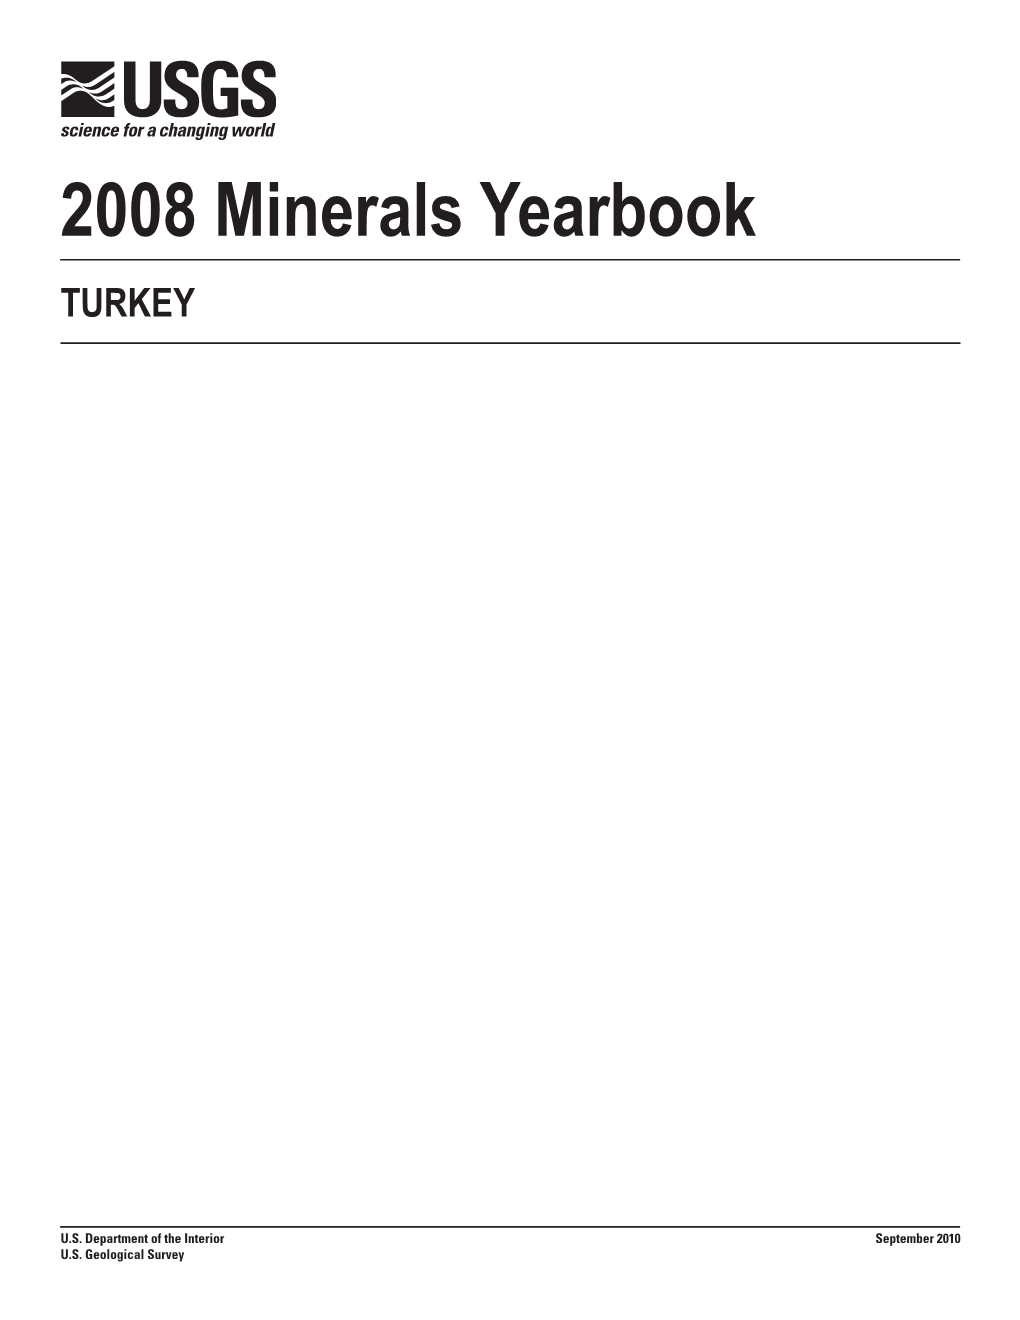 The Mineral Industry of Turkey in 2008